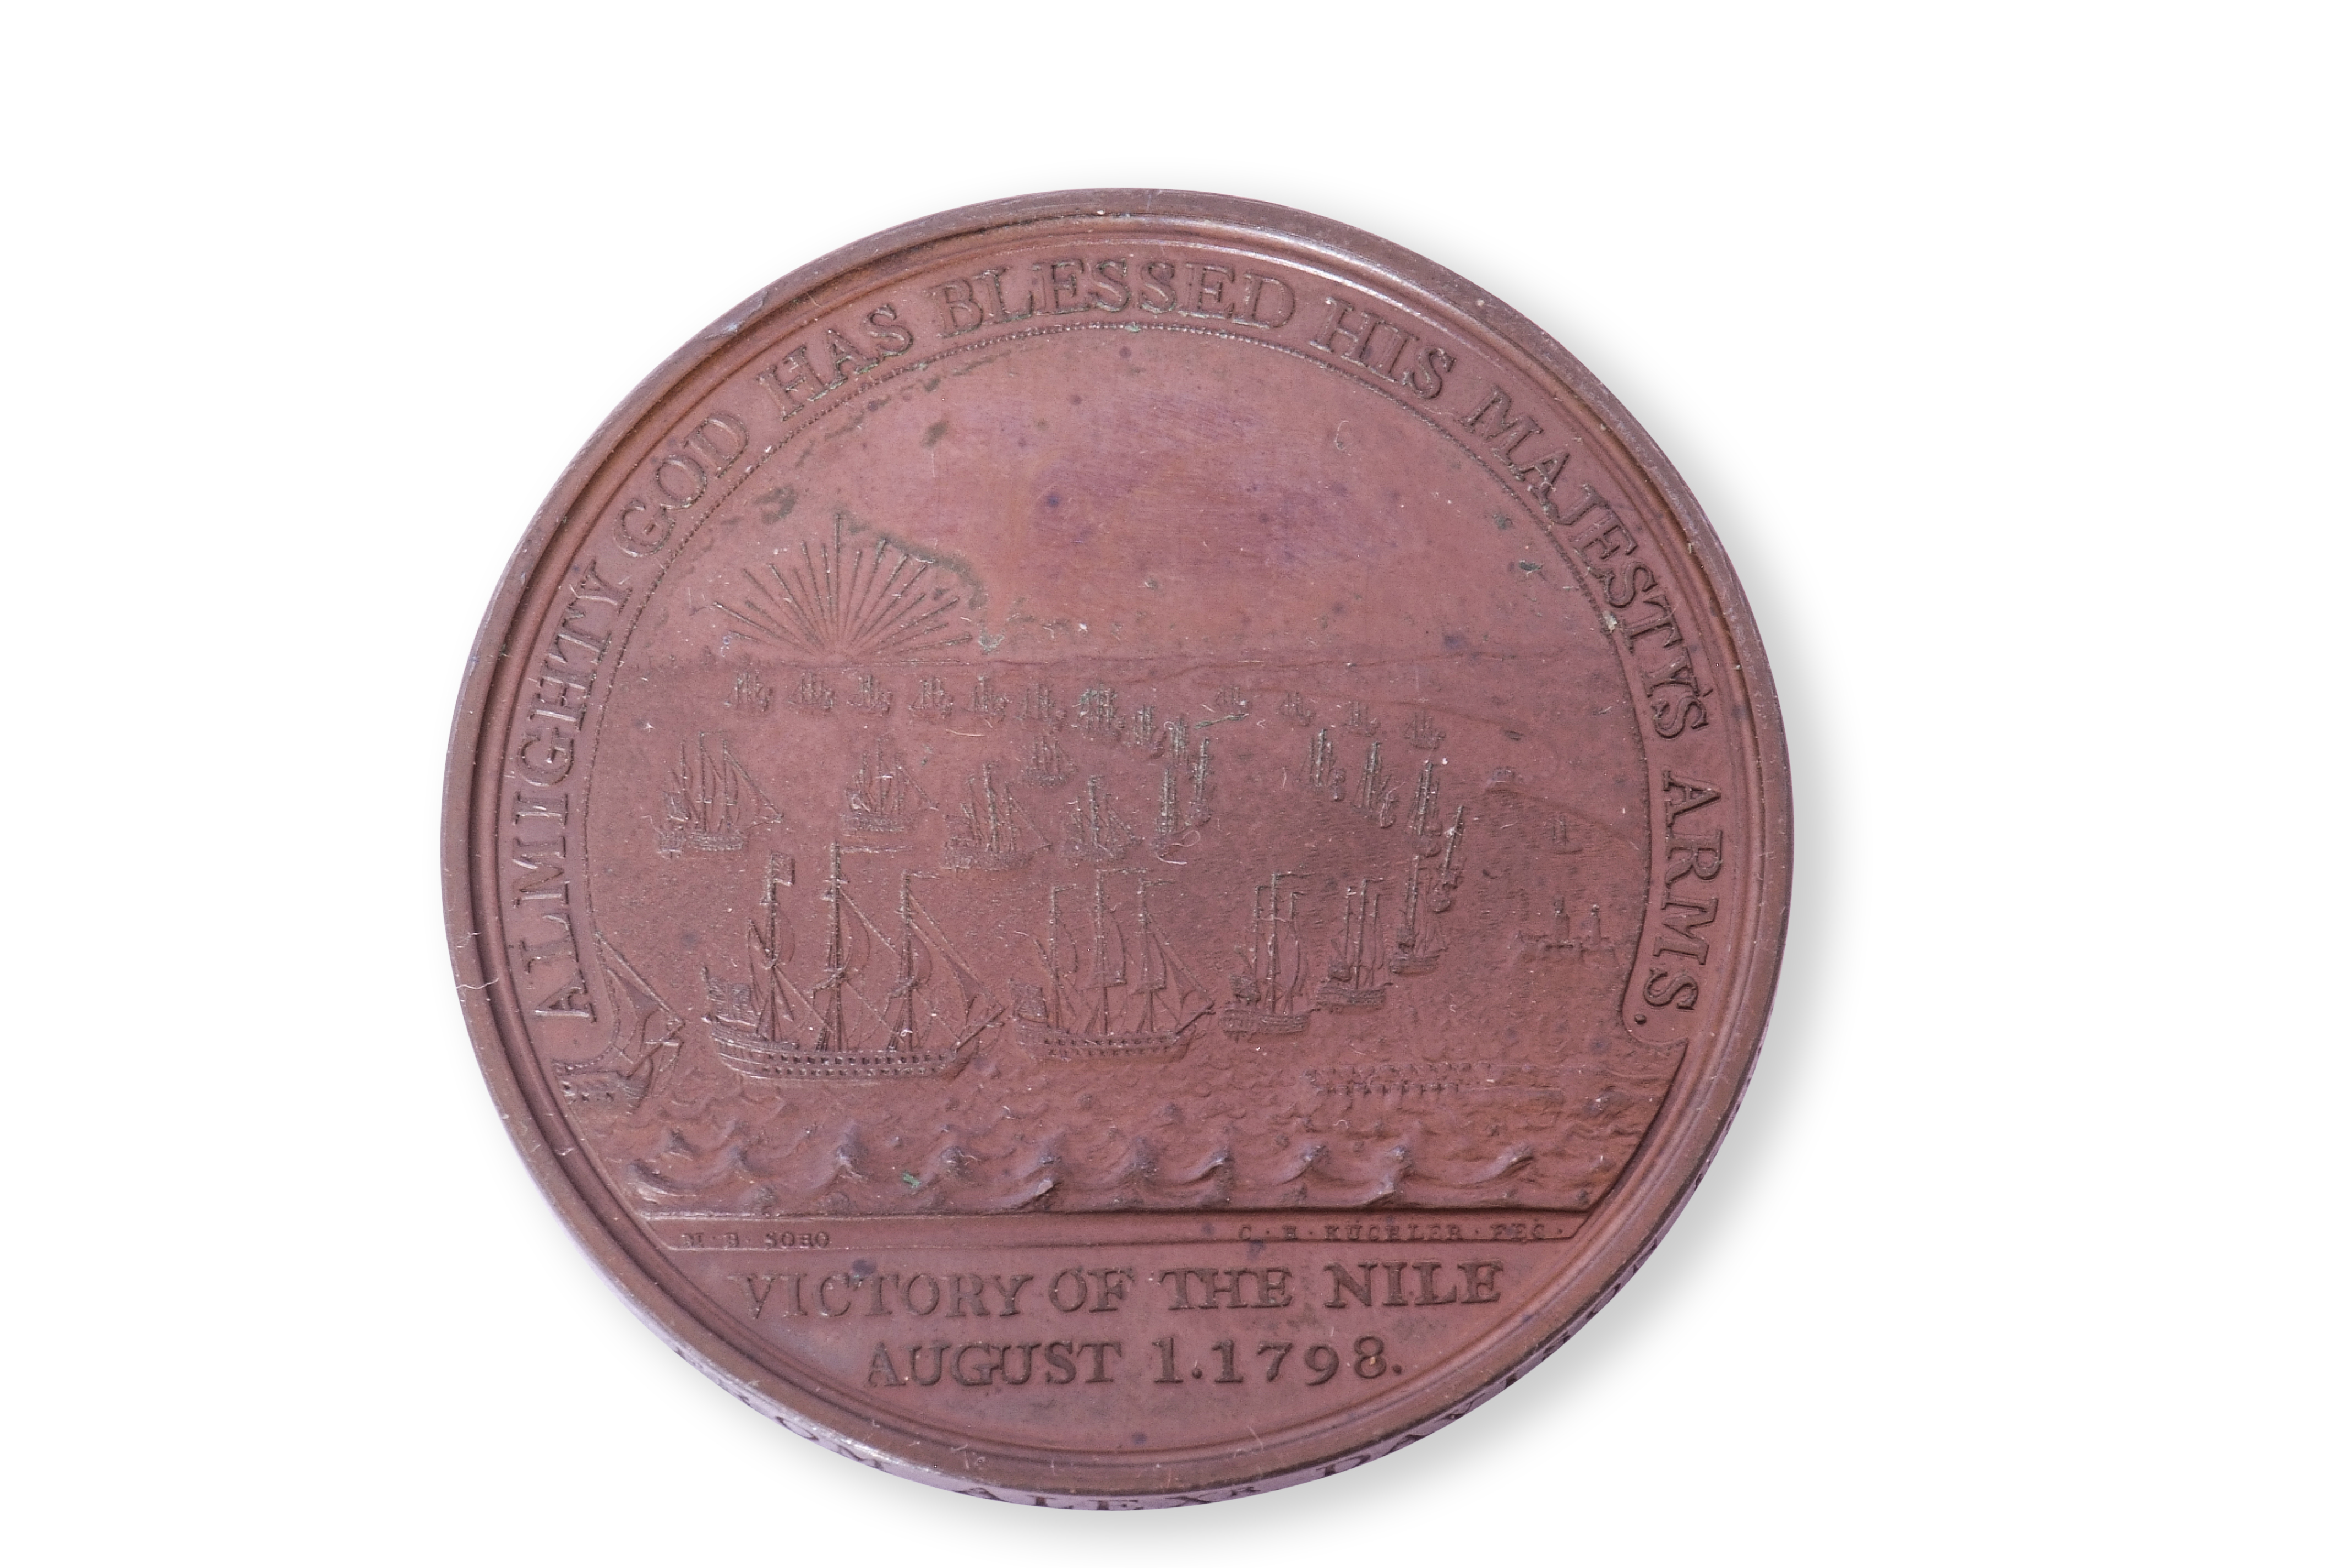 Davidson's Nile Medal, bronze, as issued to ratings, 47mm - Image 2 of 7